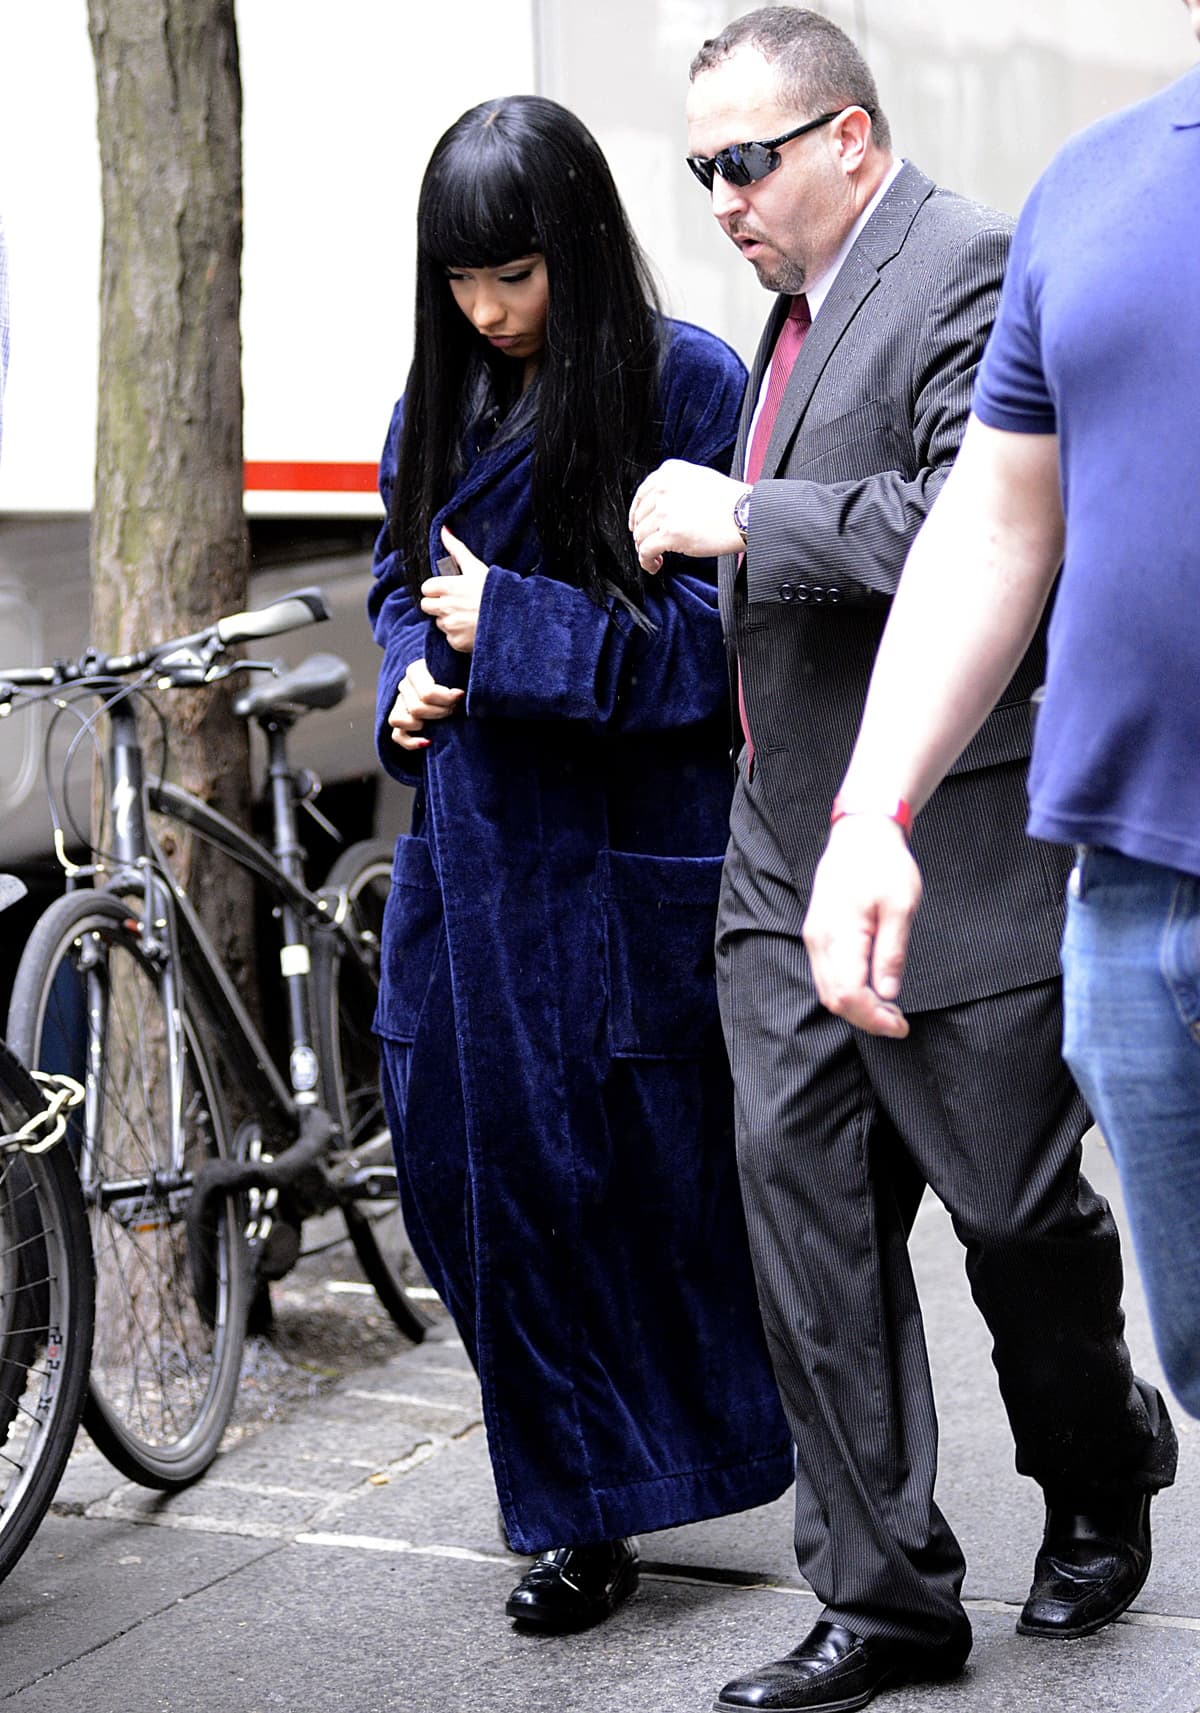 Singer Nicki Minaj is seen on the set of "The Other Woman"